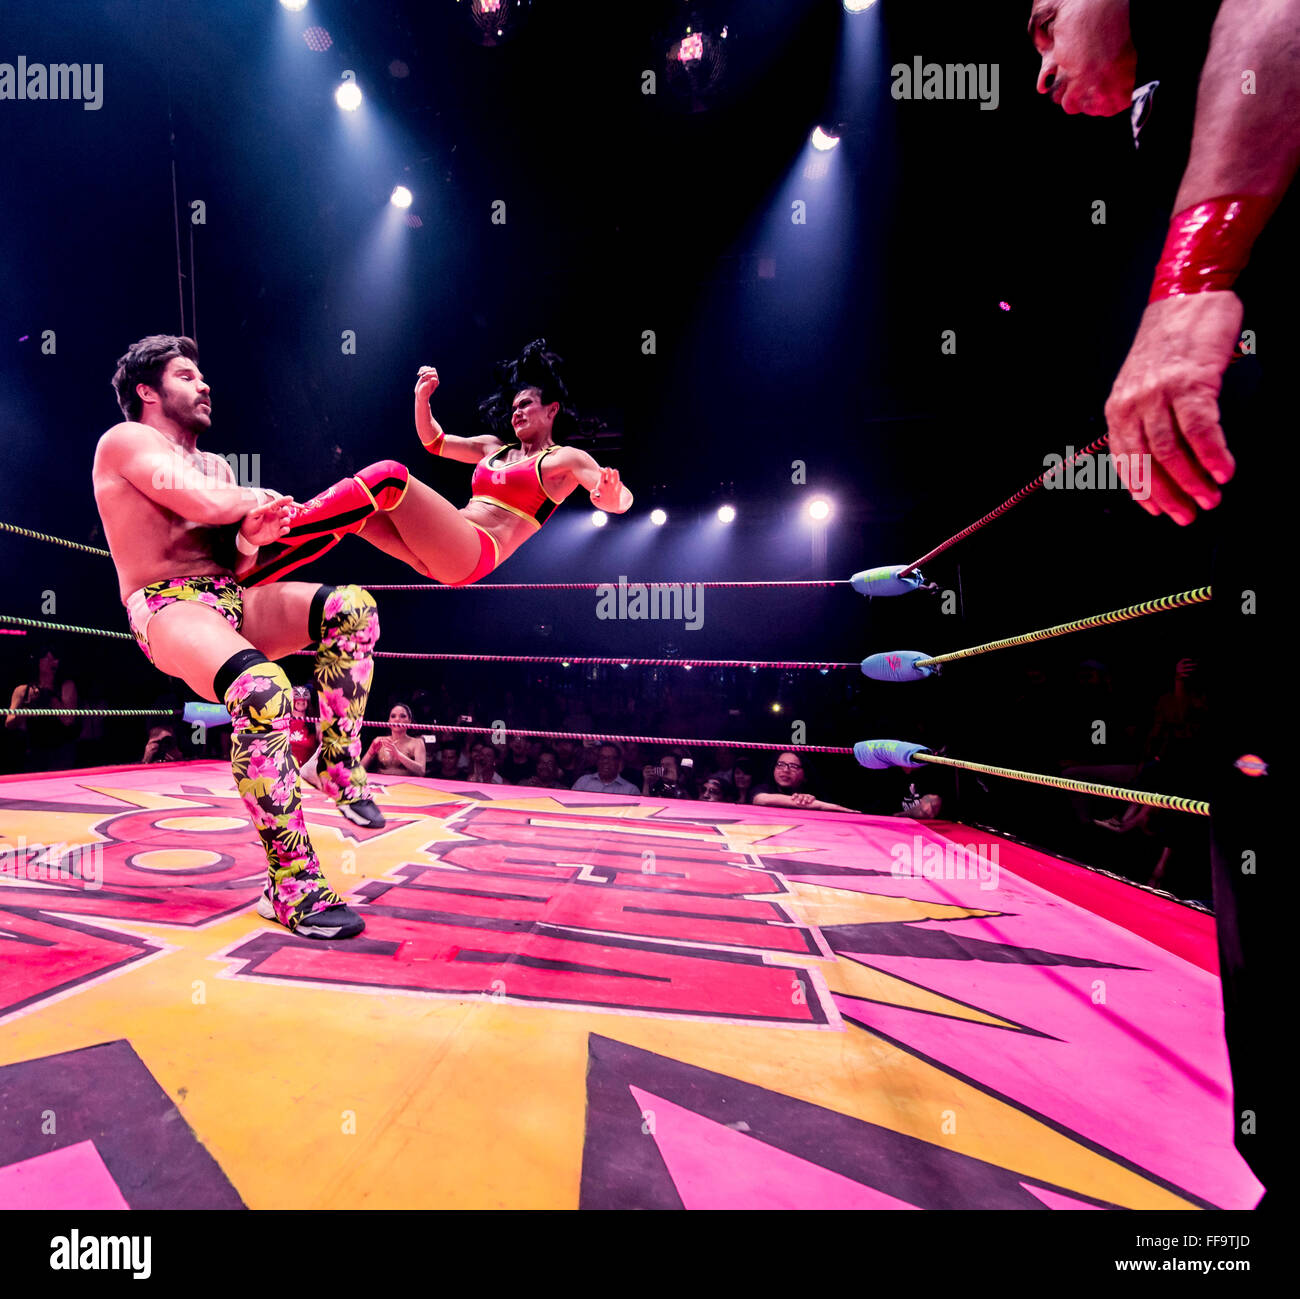 Feb. 10, 2016 - Los Angeles, California, U.S. -  Lucha VaVOOM, a raucus mashup of Mexican masked wrestling and saucy striptease, presents ''Crazy in Love,'' their 2016 Valentine's Day show running for two nights at the historic Mayan Theatre in downtown Los Angeles.(Credit Image: © Brian Cahn via ZUMA Wire) Stock Photo